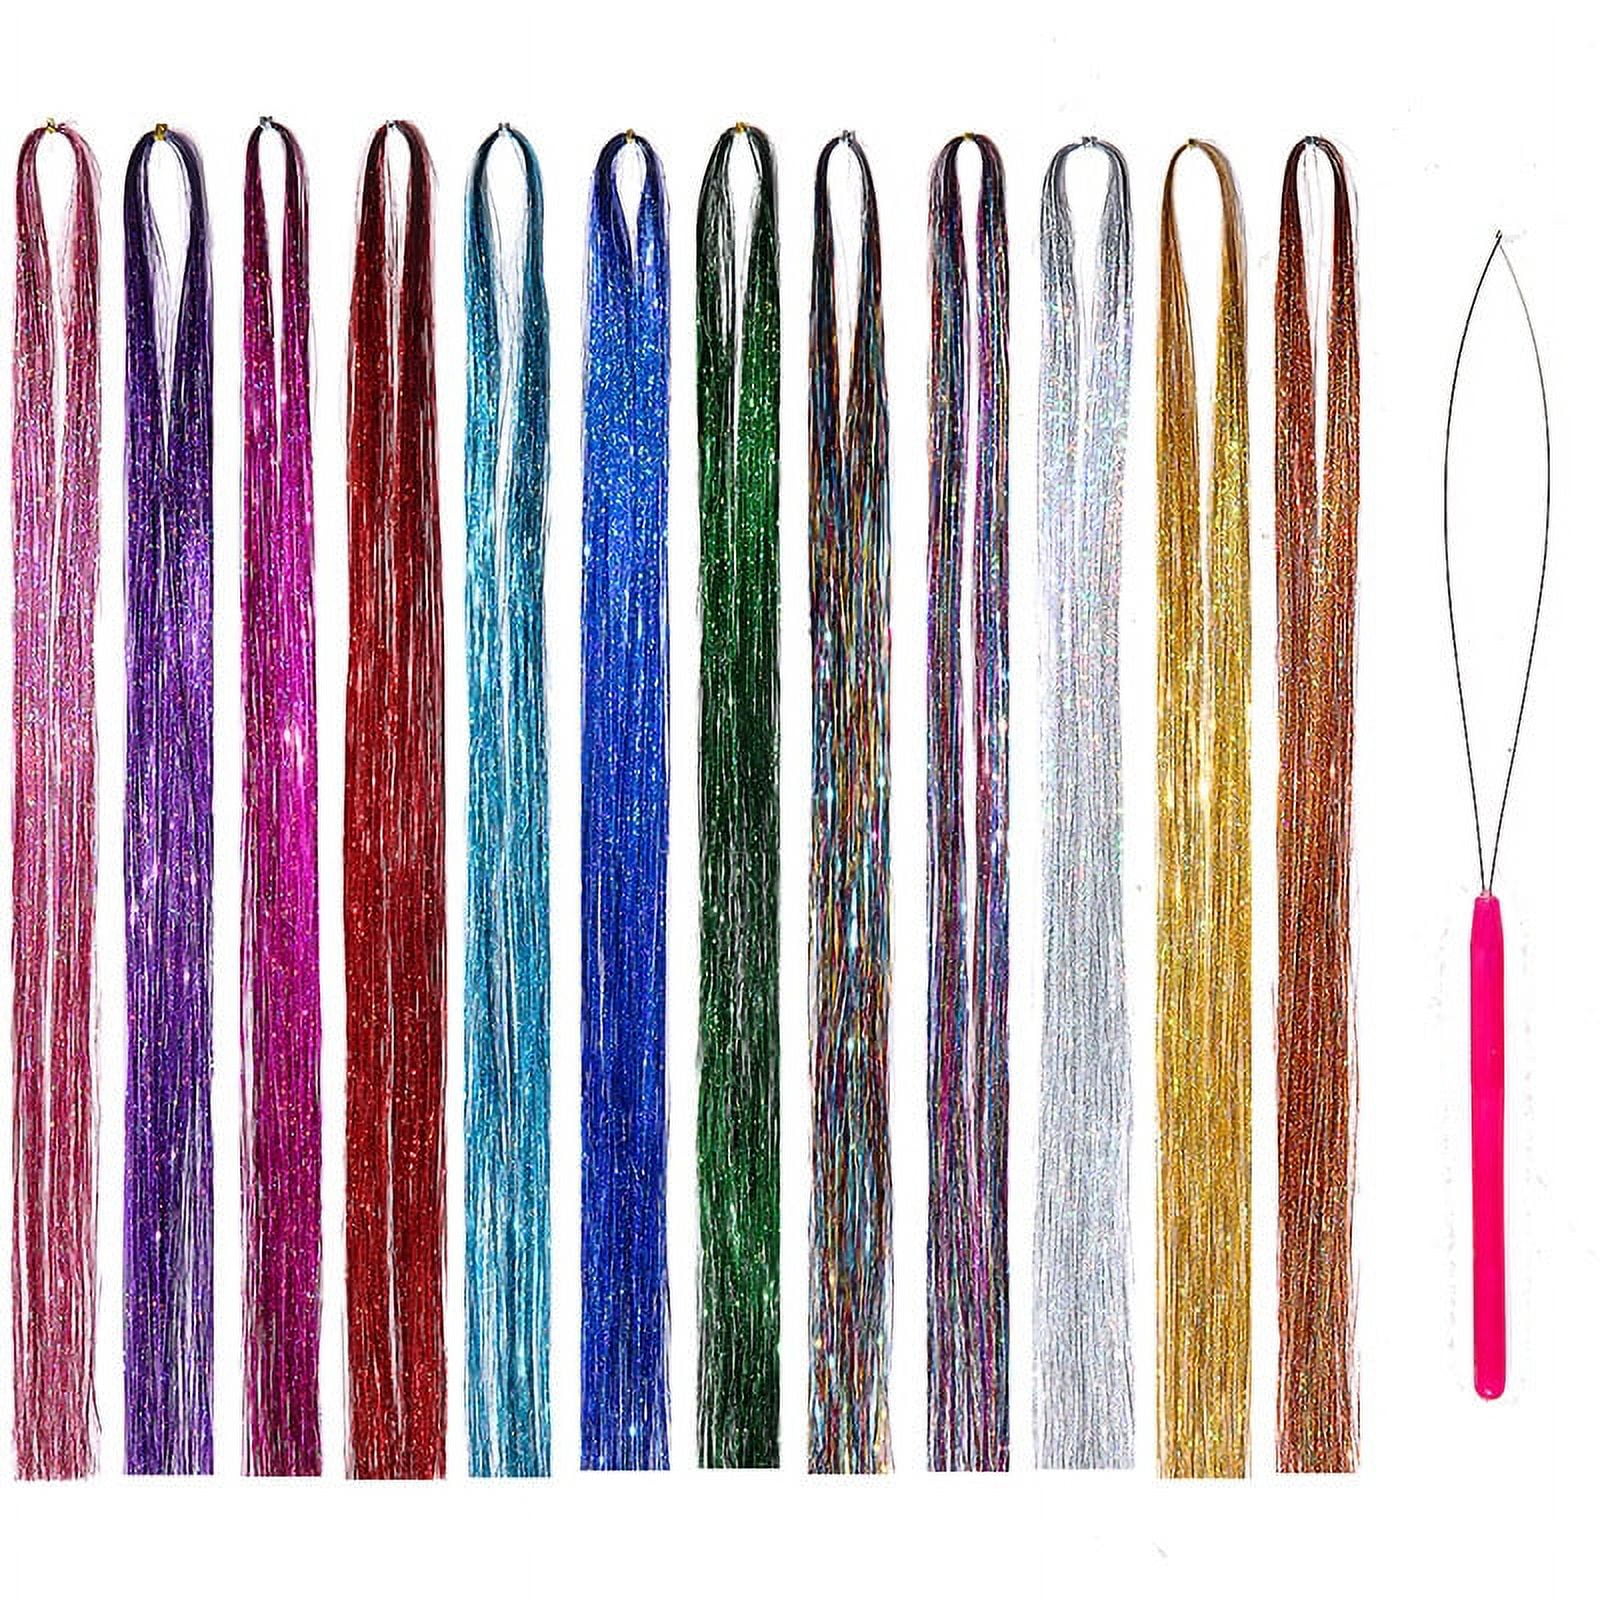 Jtween Hair Tinsel,Hair Tinsel Kit with Tools,Tinsel Hair Extensions,12 Colors 2400 Strands Fairy Hair Tinsel Heat Resistant 47 inch Hair Glitter